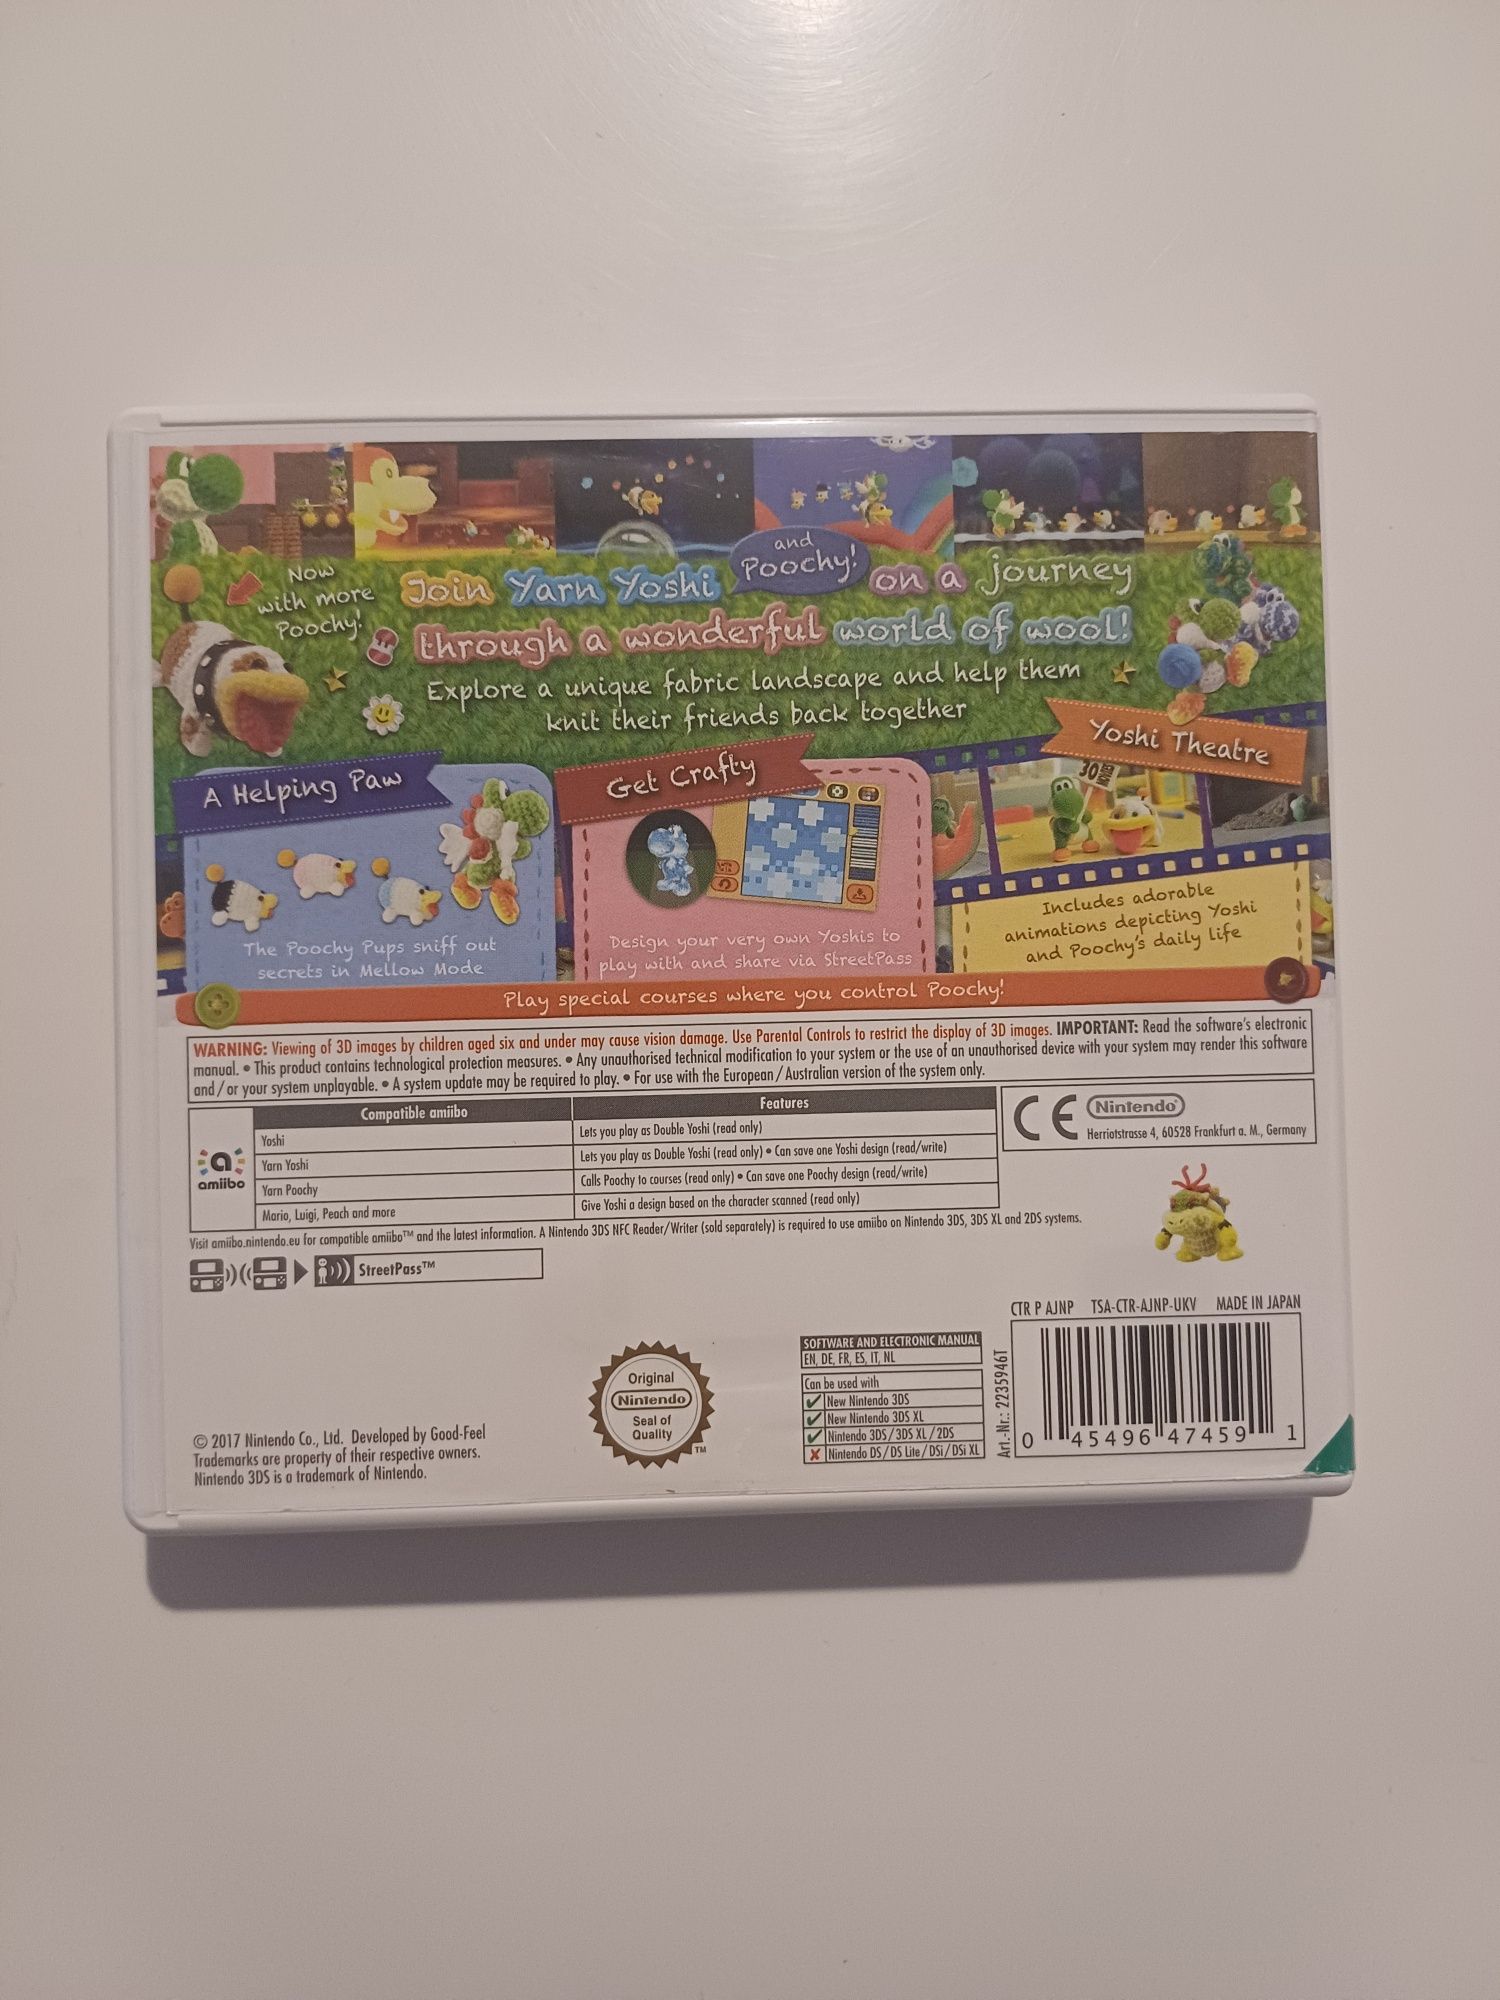 Poochy and Yoshi's Woolly World Nintendo 3Ds angielska